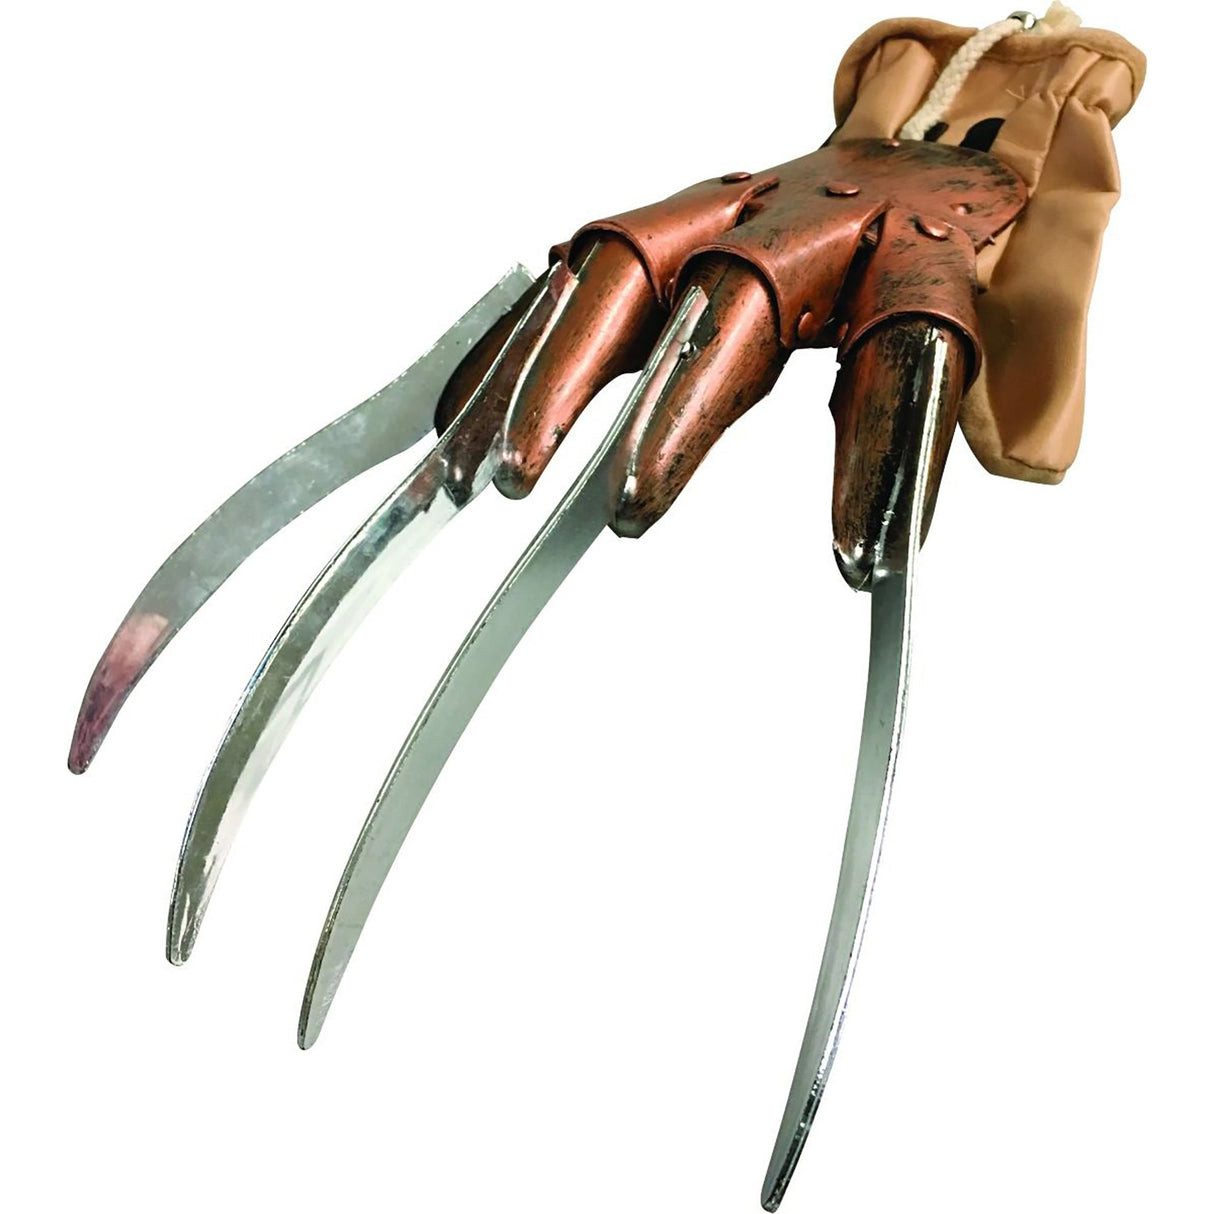 RUBIE S COSTUME CO Costume Accessories Freddy Krueger deluxe glove for adults, A Nightmare on Elm Street 082686065917